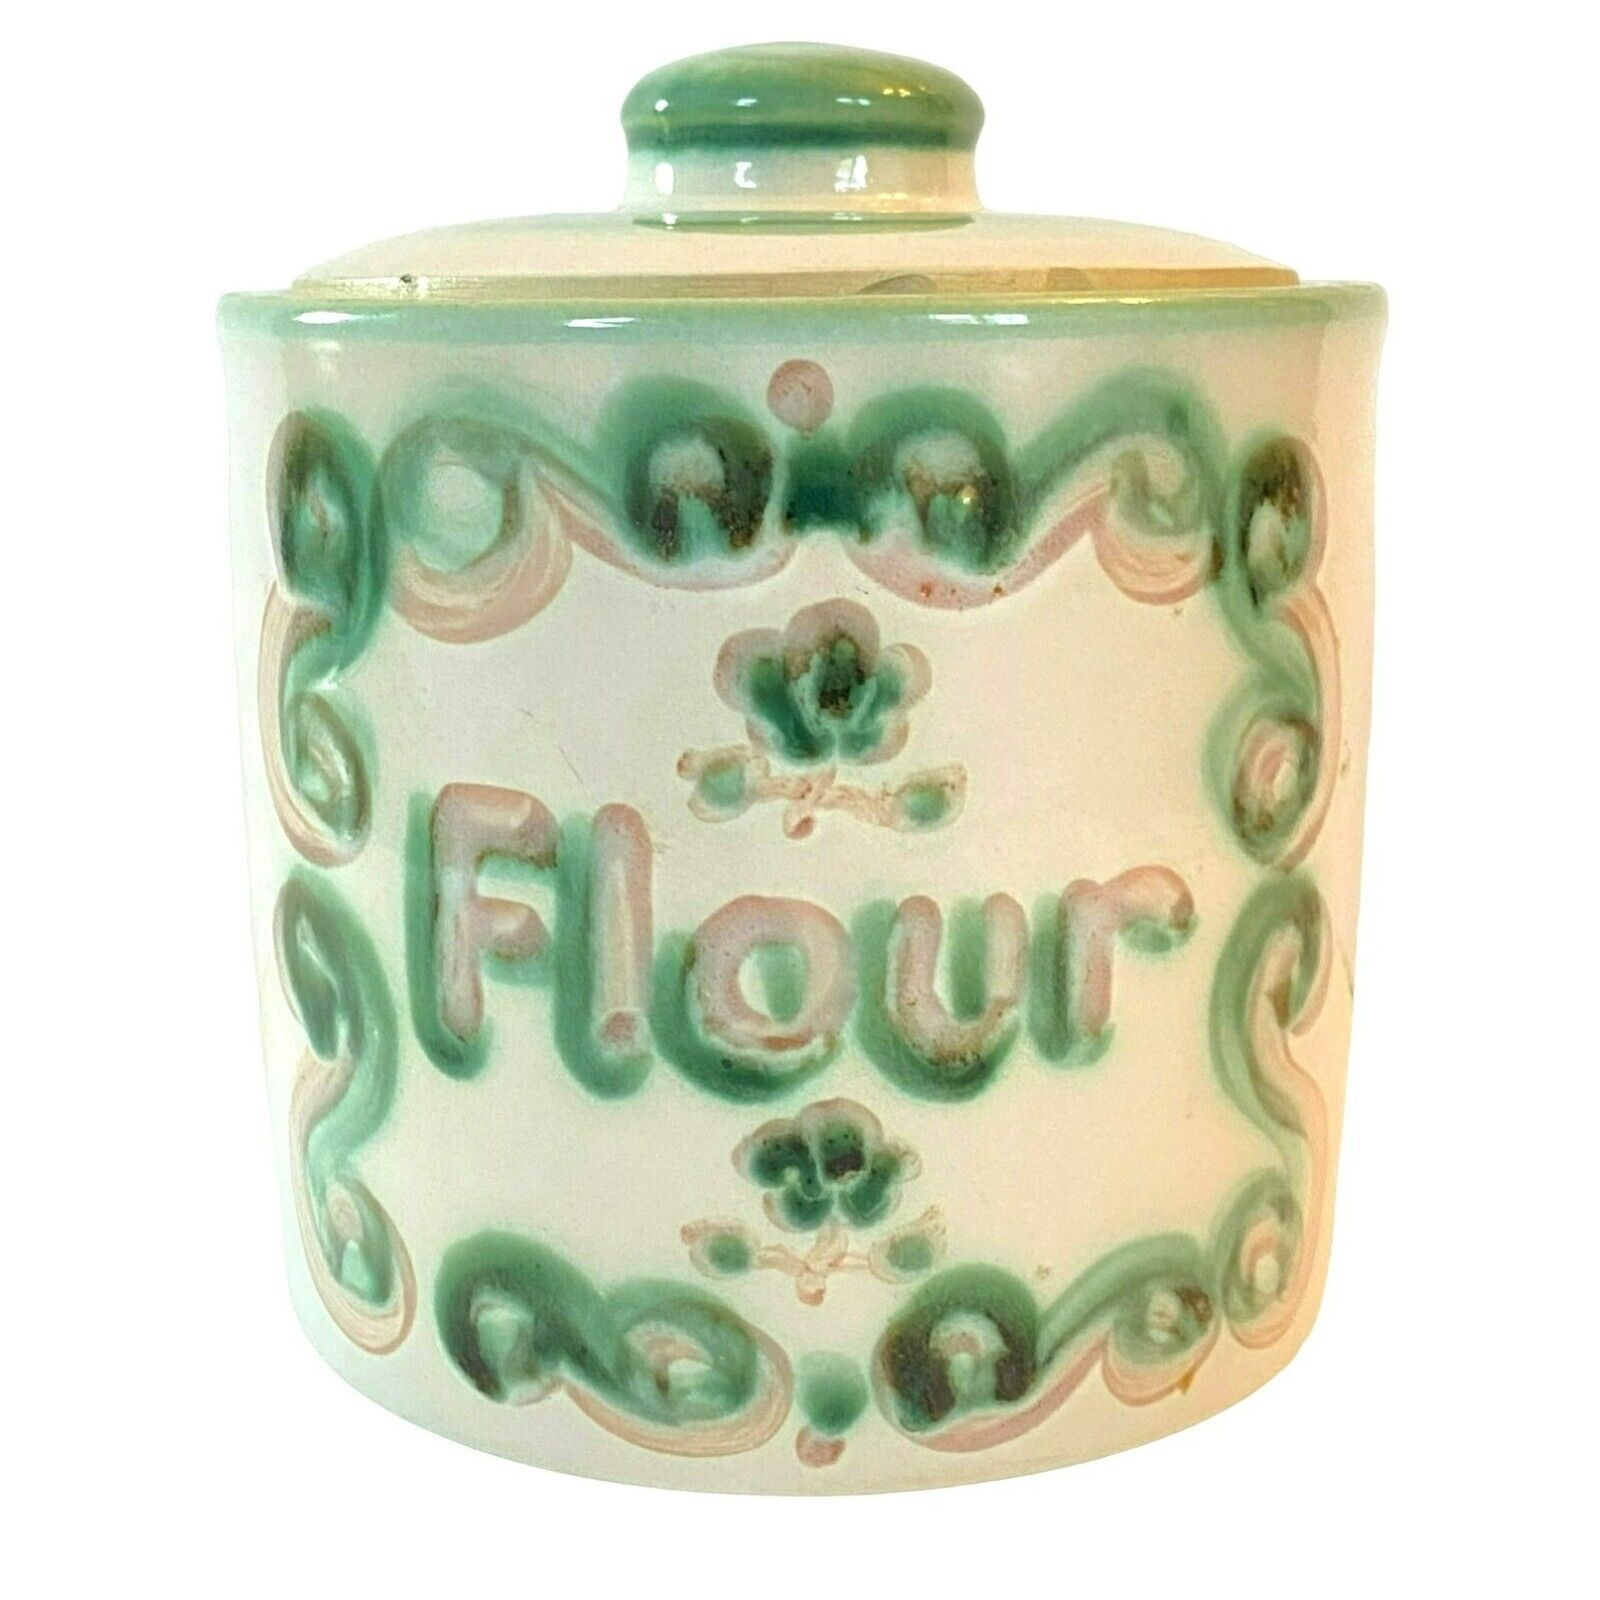 M.A. Hadley Pottery Flour Canister Pears & Grapes in Green Peach Please Fill Me